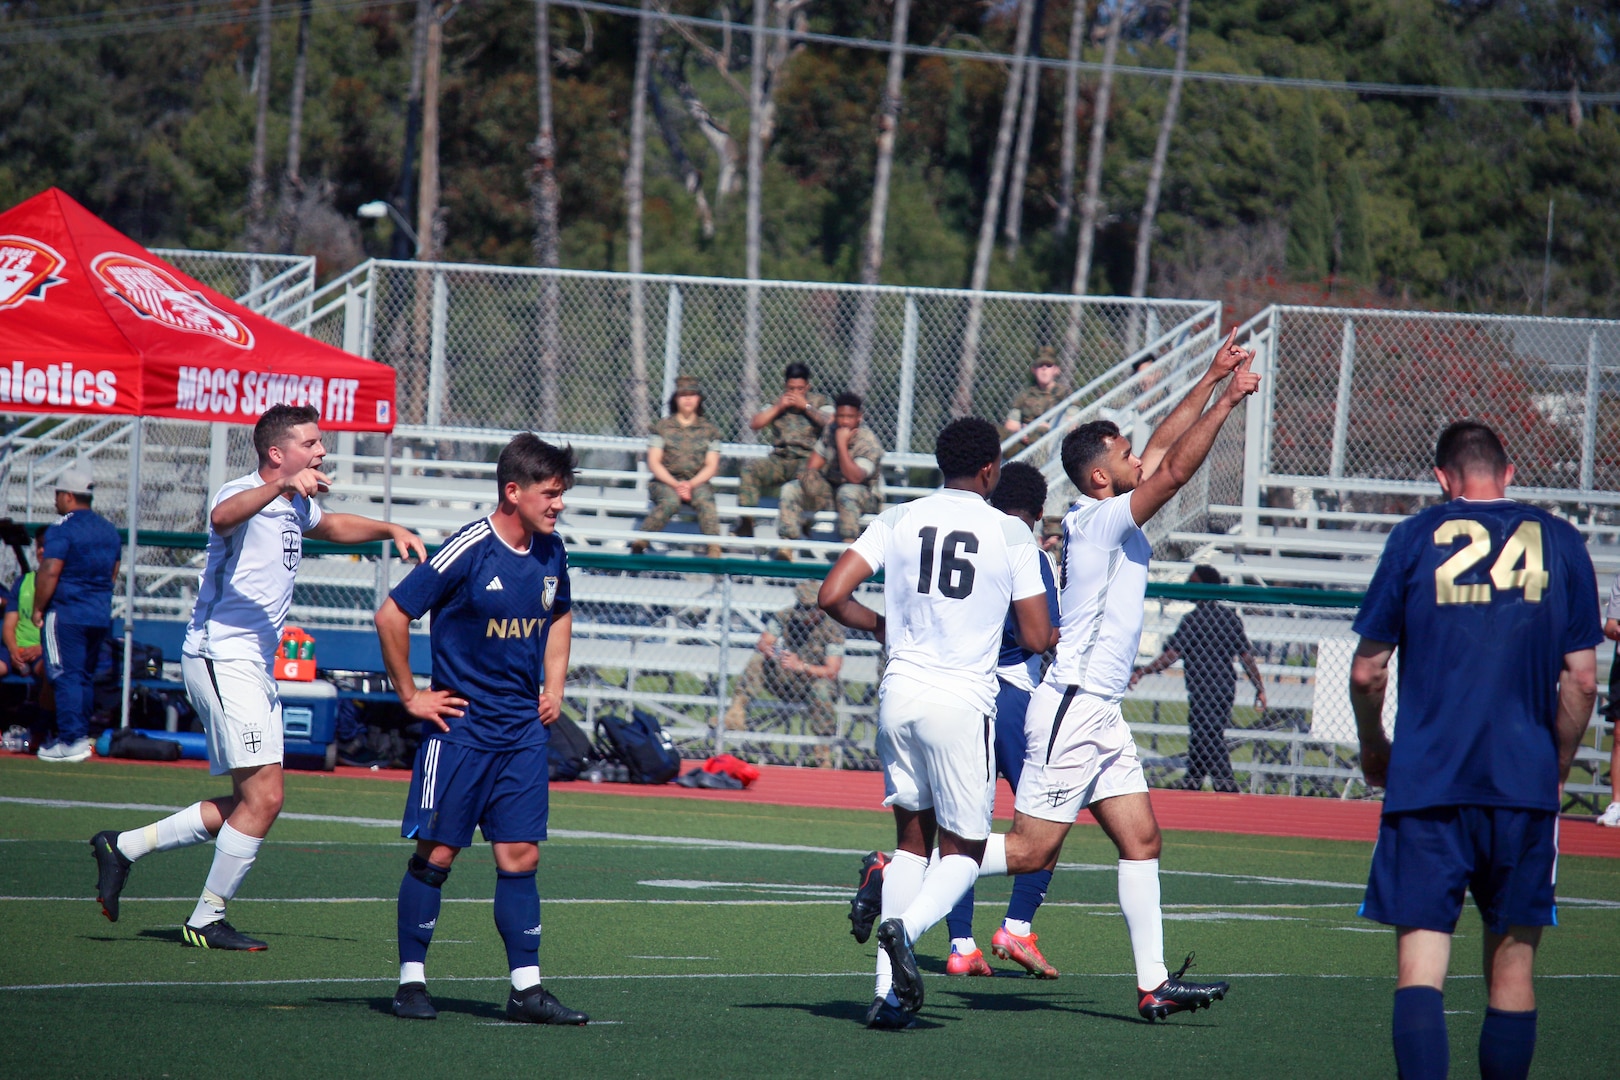 Airman 1st Class Isaac De Souza of Ramstein Air Base, Germany raises his arms after scoring the winning goal during match 2, featuring Navy v Air Force, of the 2023 Armed Forces Men’s Soccer Championship held at the Paige Fieldhouse Marine Corps Base Camp Pendleton, California on 5 April 2023.  The Armed Forces Men's Soccer Championship hosted by Marine Corps Base Camp Pendleton, California from April 4-11.  The Armed Forces Championship features teams from the Army, Marine Corps, Navy (with Coast Guard runners), and Air Force (with Space Force Runners).  Department of Defense Photo by Mr. Steven Dinote - Released.